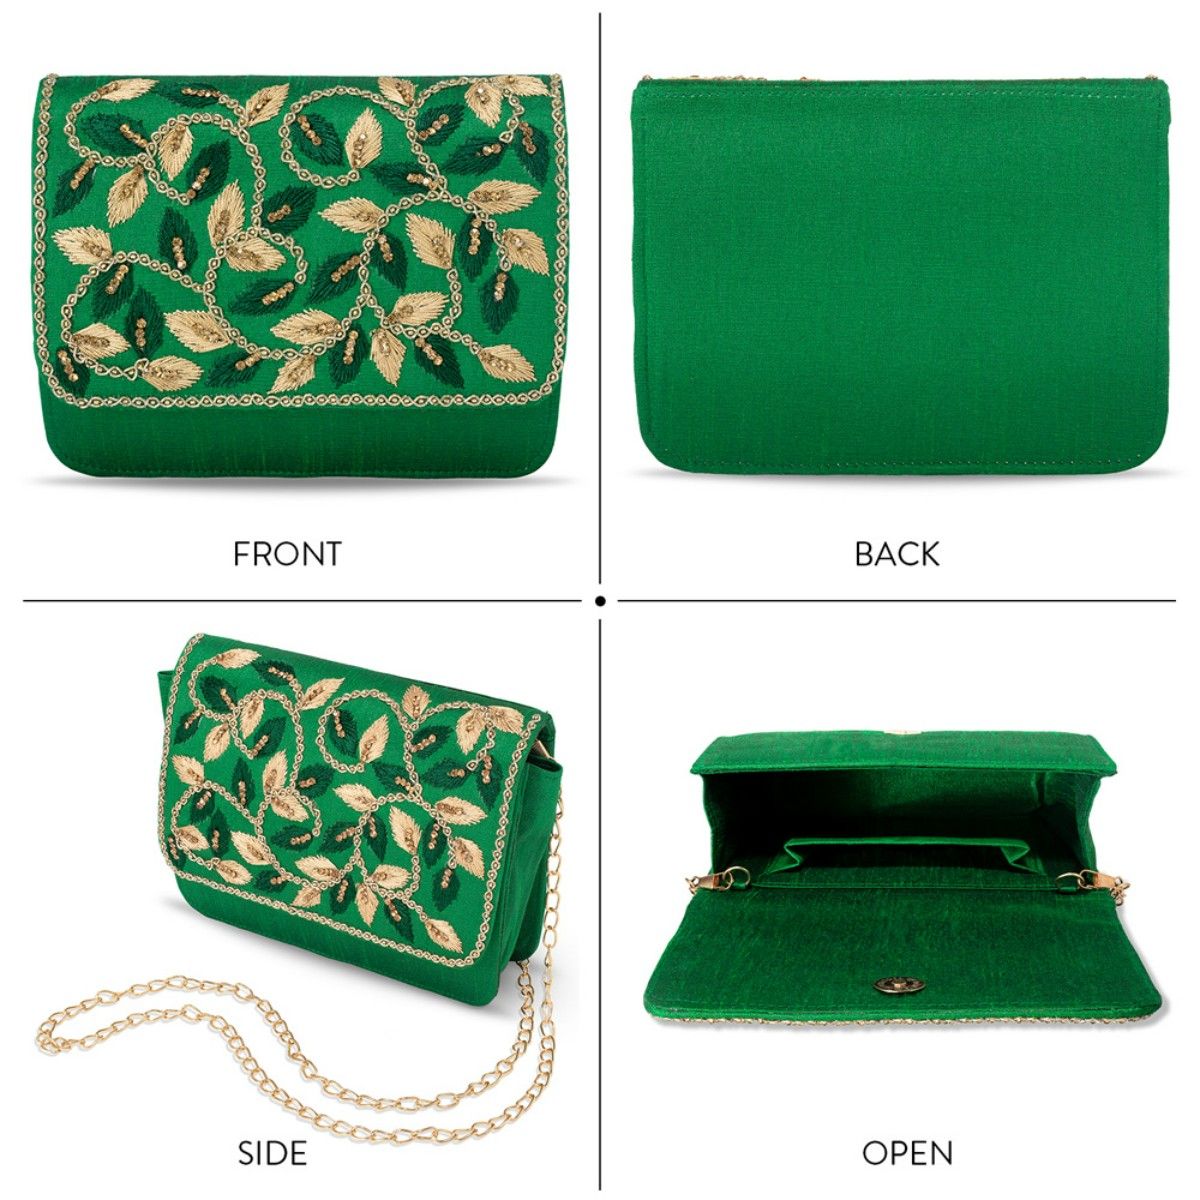 Royal Green Rhinestone Evening Clutch: Elegant Bridal Handbag For Weddings  And Parties With Crystal Purse And Crystal Chain Shoulder Strap From  Fashiontopp, $37.24 | DHgate.Com